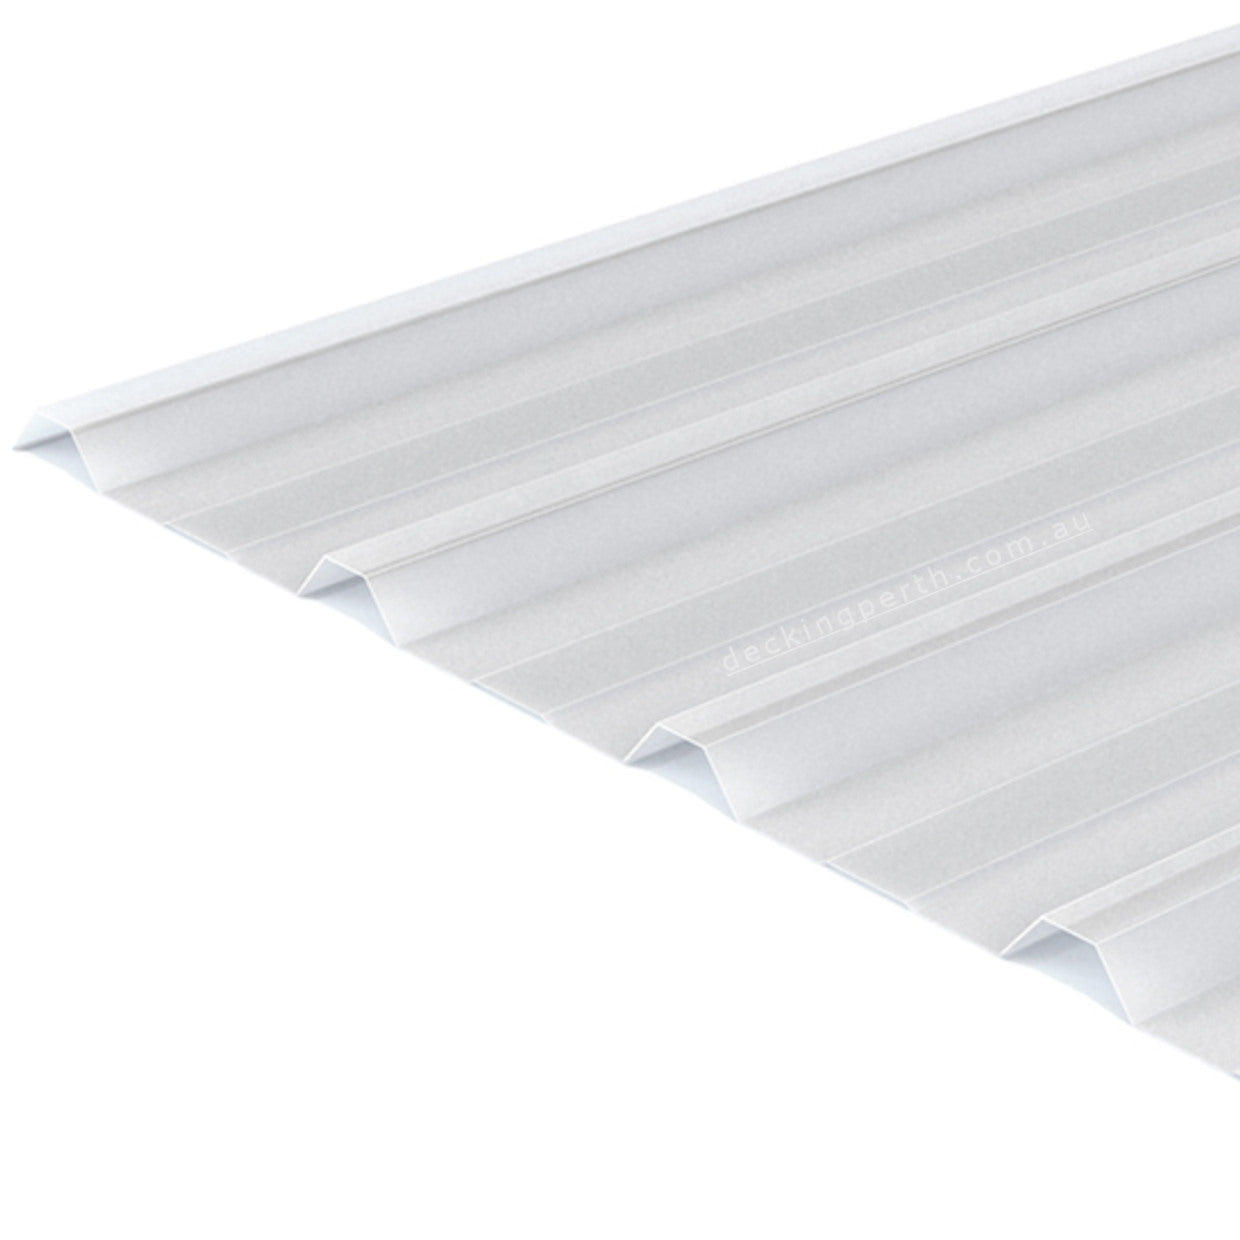 SUNSKY_Industrial_Solar_Ice_polycarbonate_sheeting_Decking_Perth